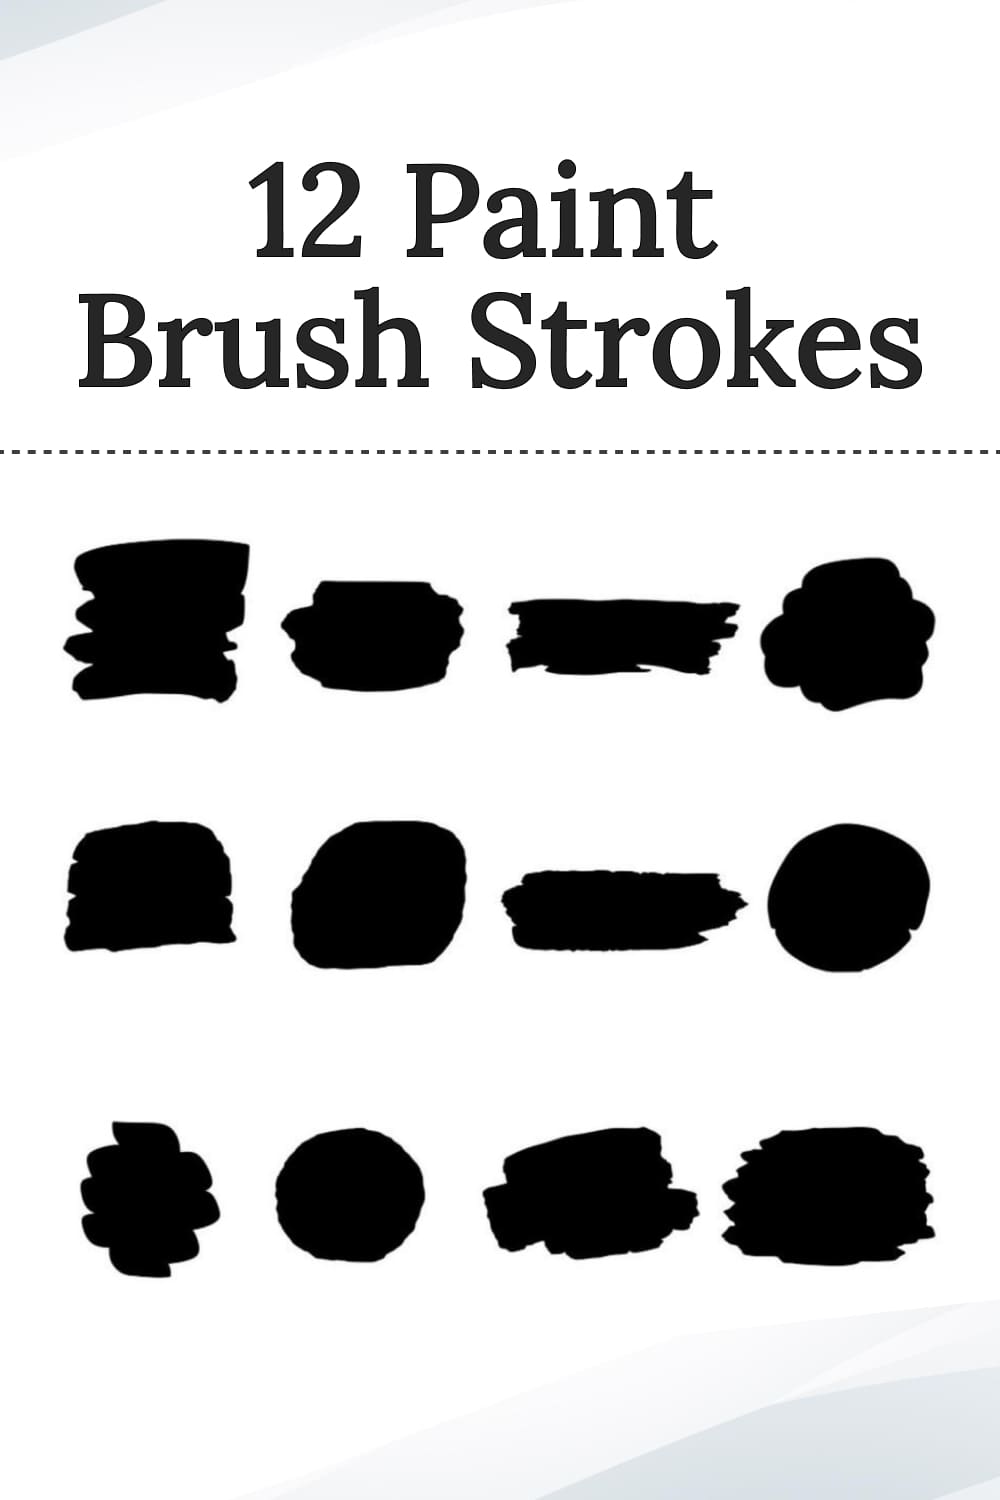 Big brushes collection in the bw.